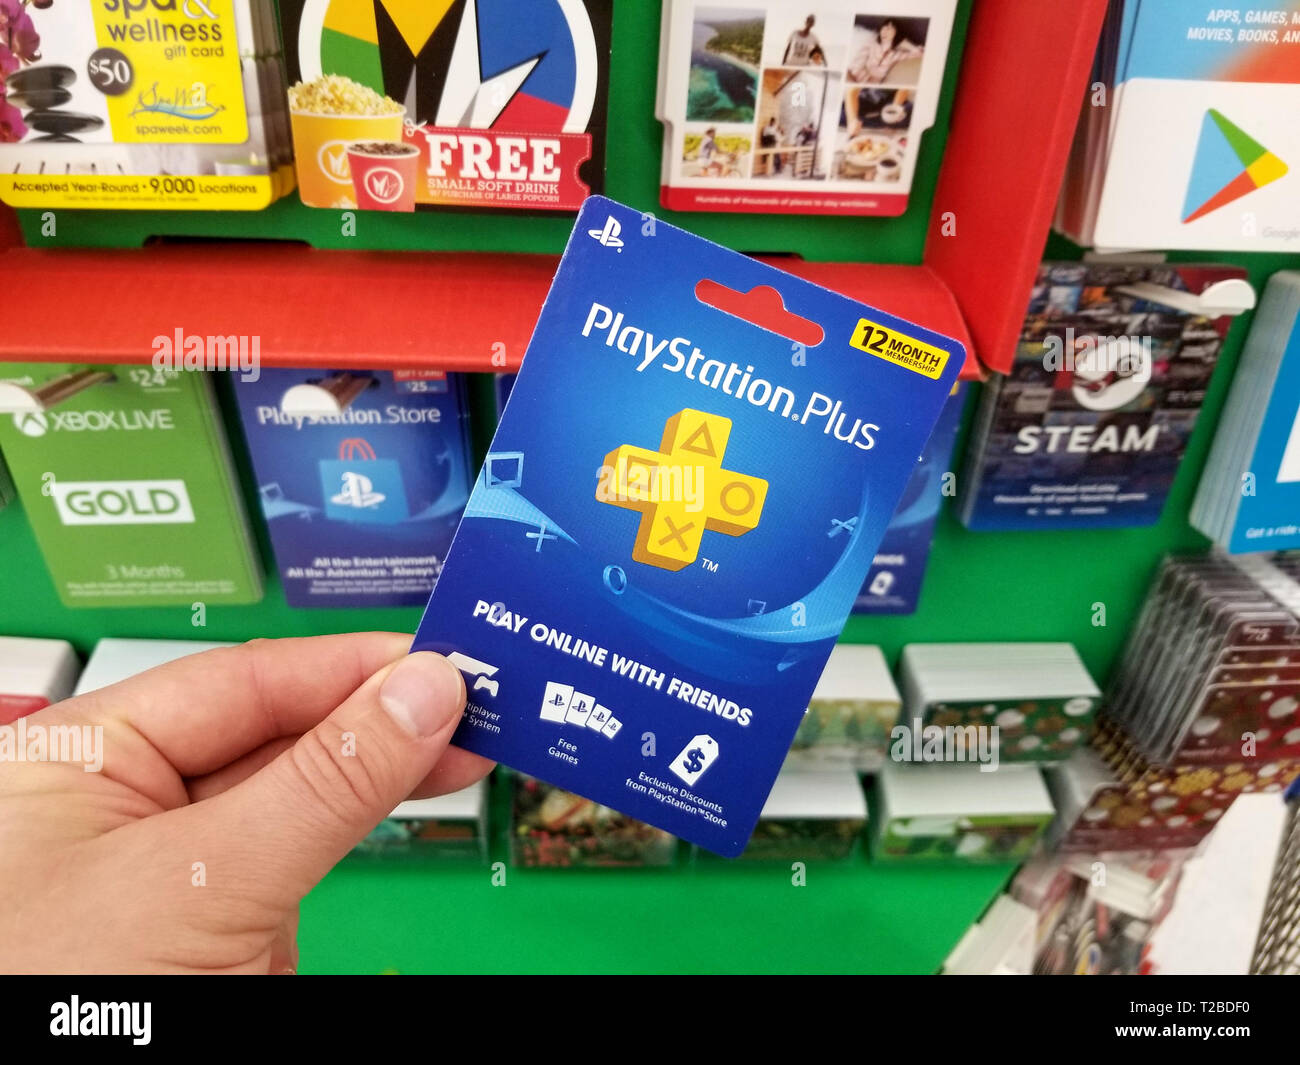 PLATTSBURGH, USA - JANUARY 21, 2019 : Play Station Plus 12 month membership gift card in a hand over a shelves with different giftcards in a Walmart s Stock Photo